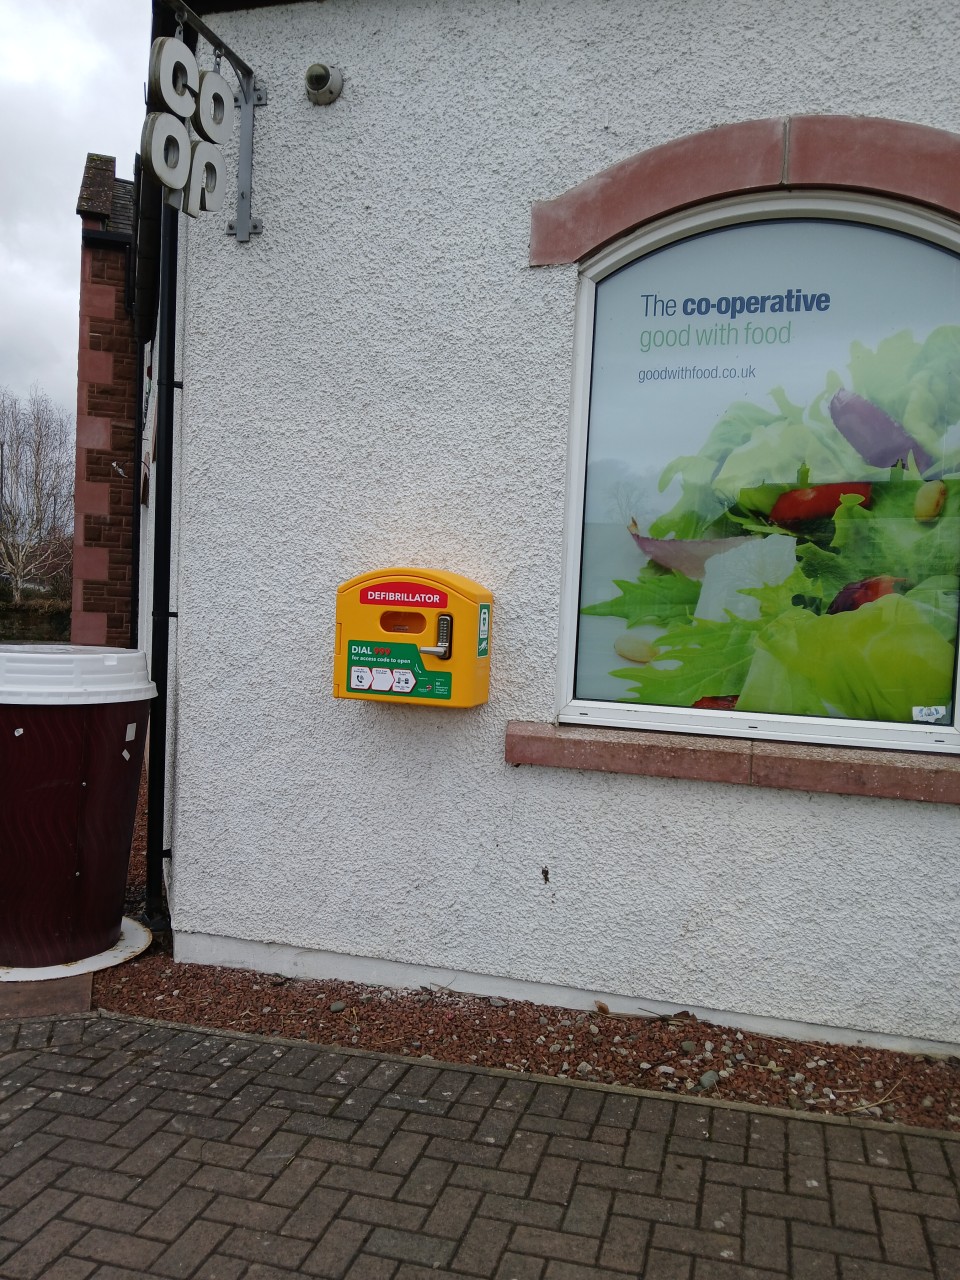 New Defibrillator at Dalston Co-op